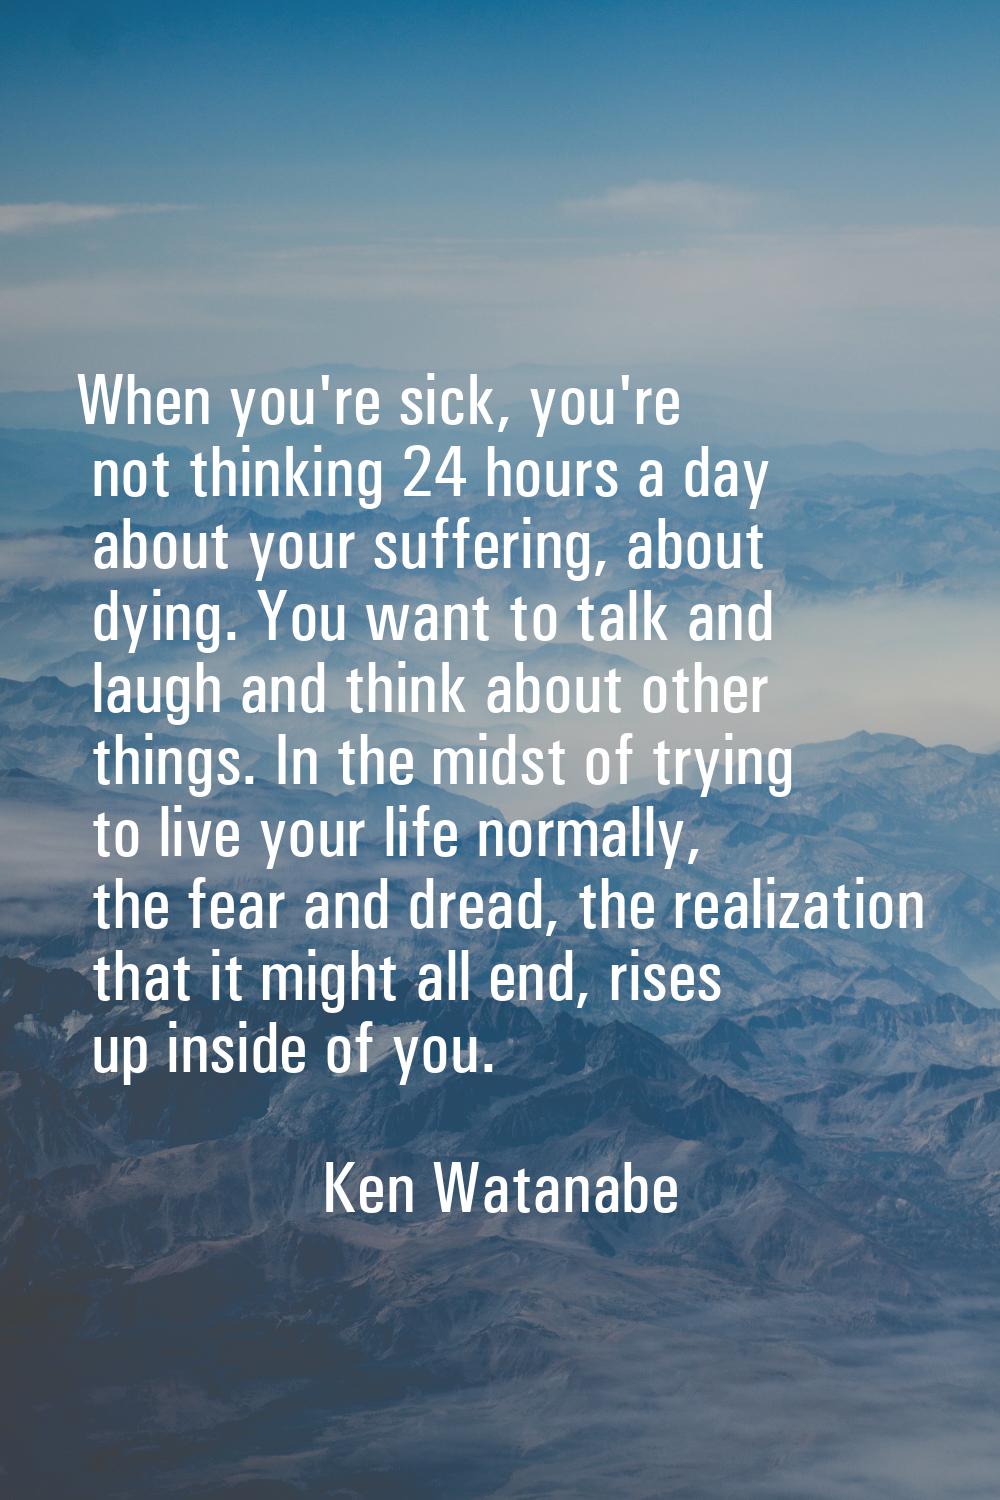 When you're sick, you're not thinking 24 hours a day about your suffering, about dying. You want to